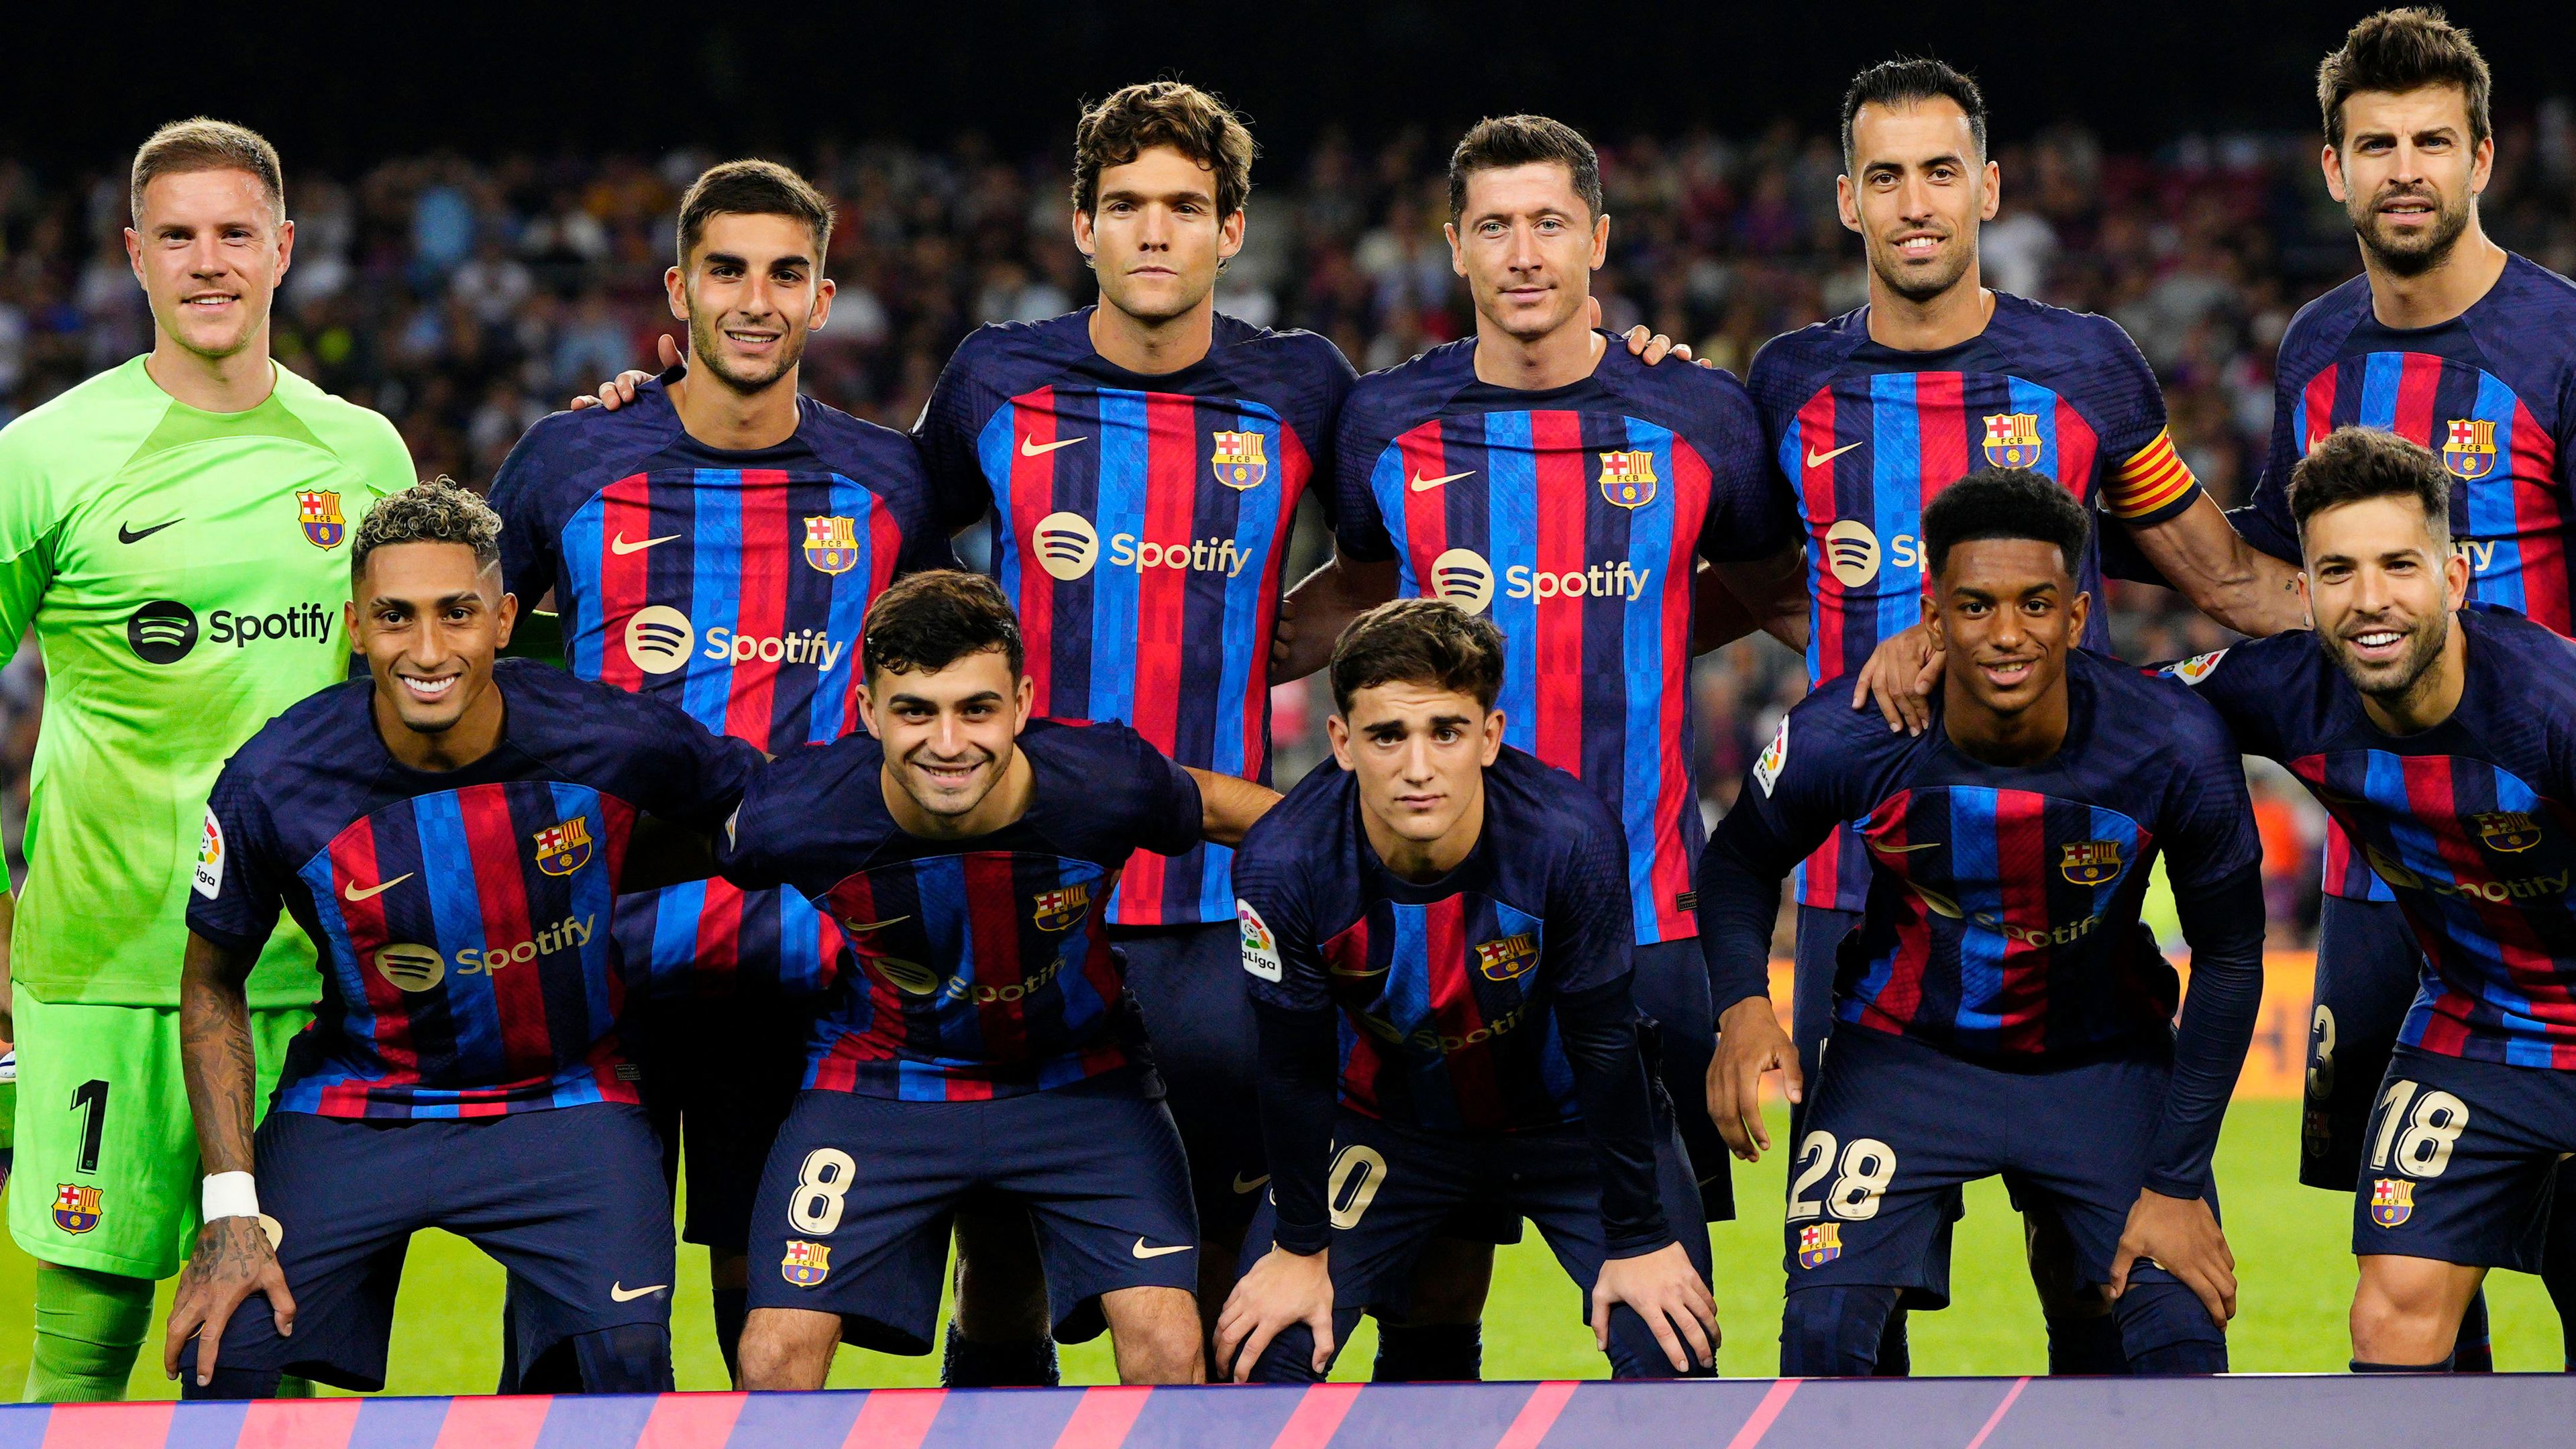 The Barcelona line up poses for a team photo ahead of their clash with RC Celta at Camp Nou on October 9.